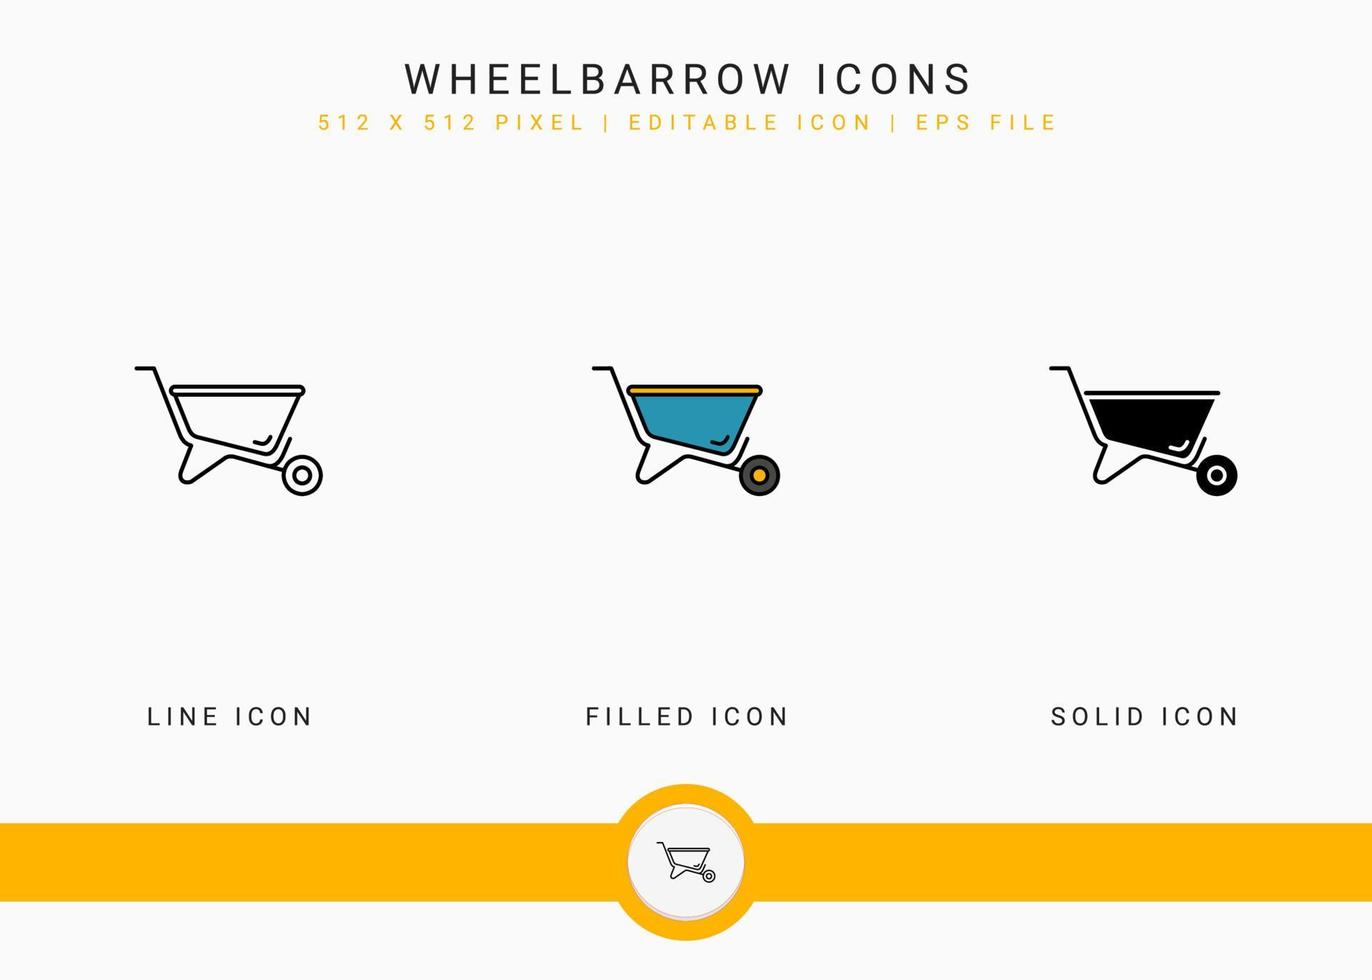 Wheelbarrow icons set vector illustration with solid icon line style. Plant gardening agriculture concept. Editable stroke icon on isolated background for web design, user interface, and mobile app